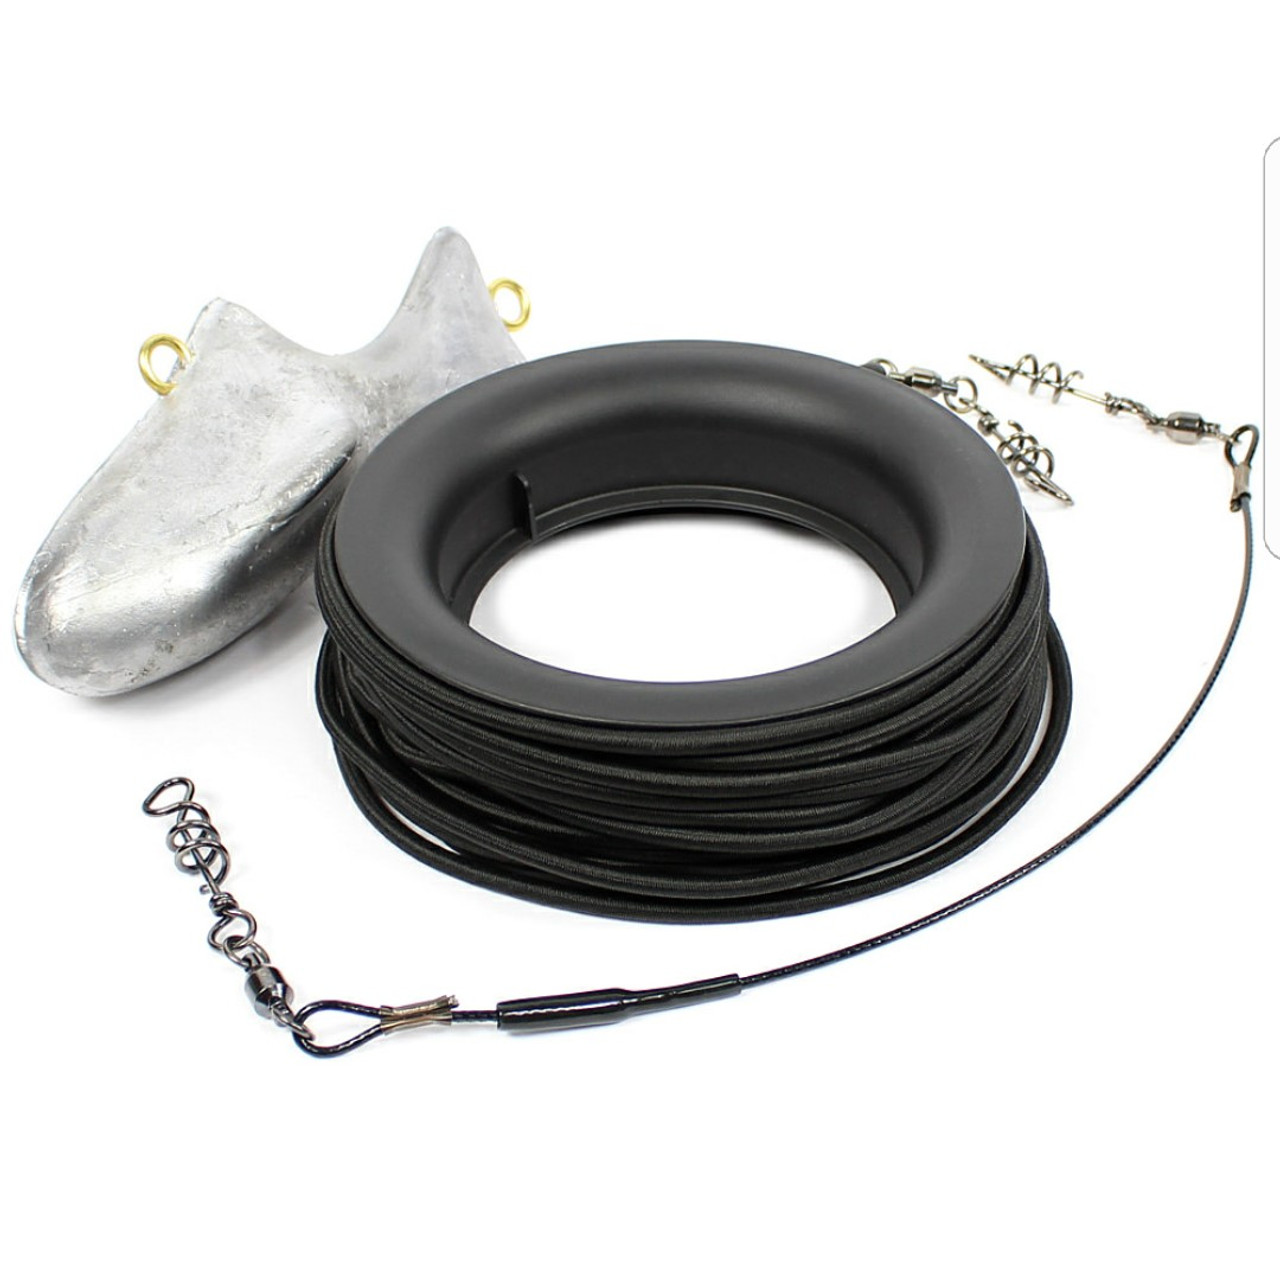 Dredge Pulling Kit in Mesh Bag with 6lb Fish Weight all need